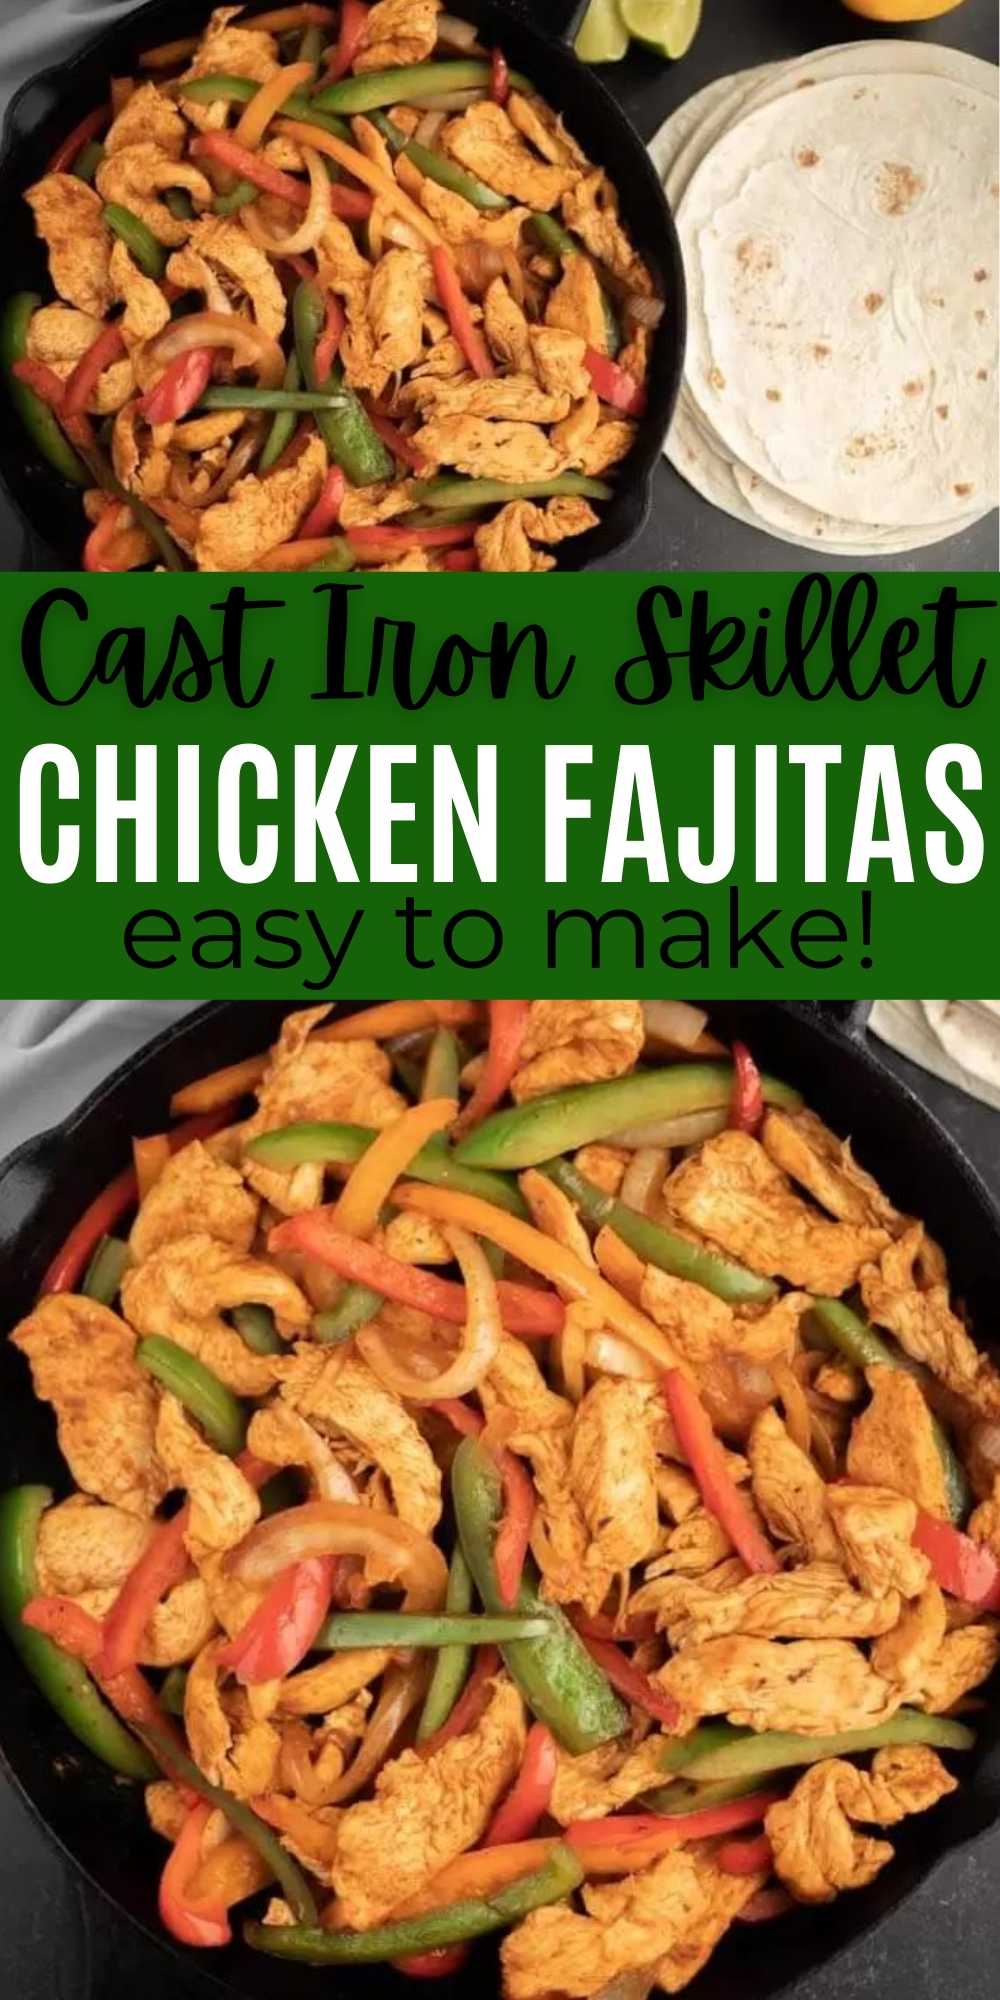 Try quick and easy Cast Iron Skillet Chicken Fajitas. It is perfect for an easy weeknight dinner. Make cast iron fajita skillet in 20 minutes. These skillet chicken fajitas can easily be low carb or keto friendly too - just serve without the tortillas.   Try this Mexican chicken fajitas skillet recipe.  #eatingonadime #chickenrecipes #fajitarecipes #skilletrecipes 
